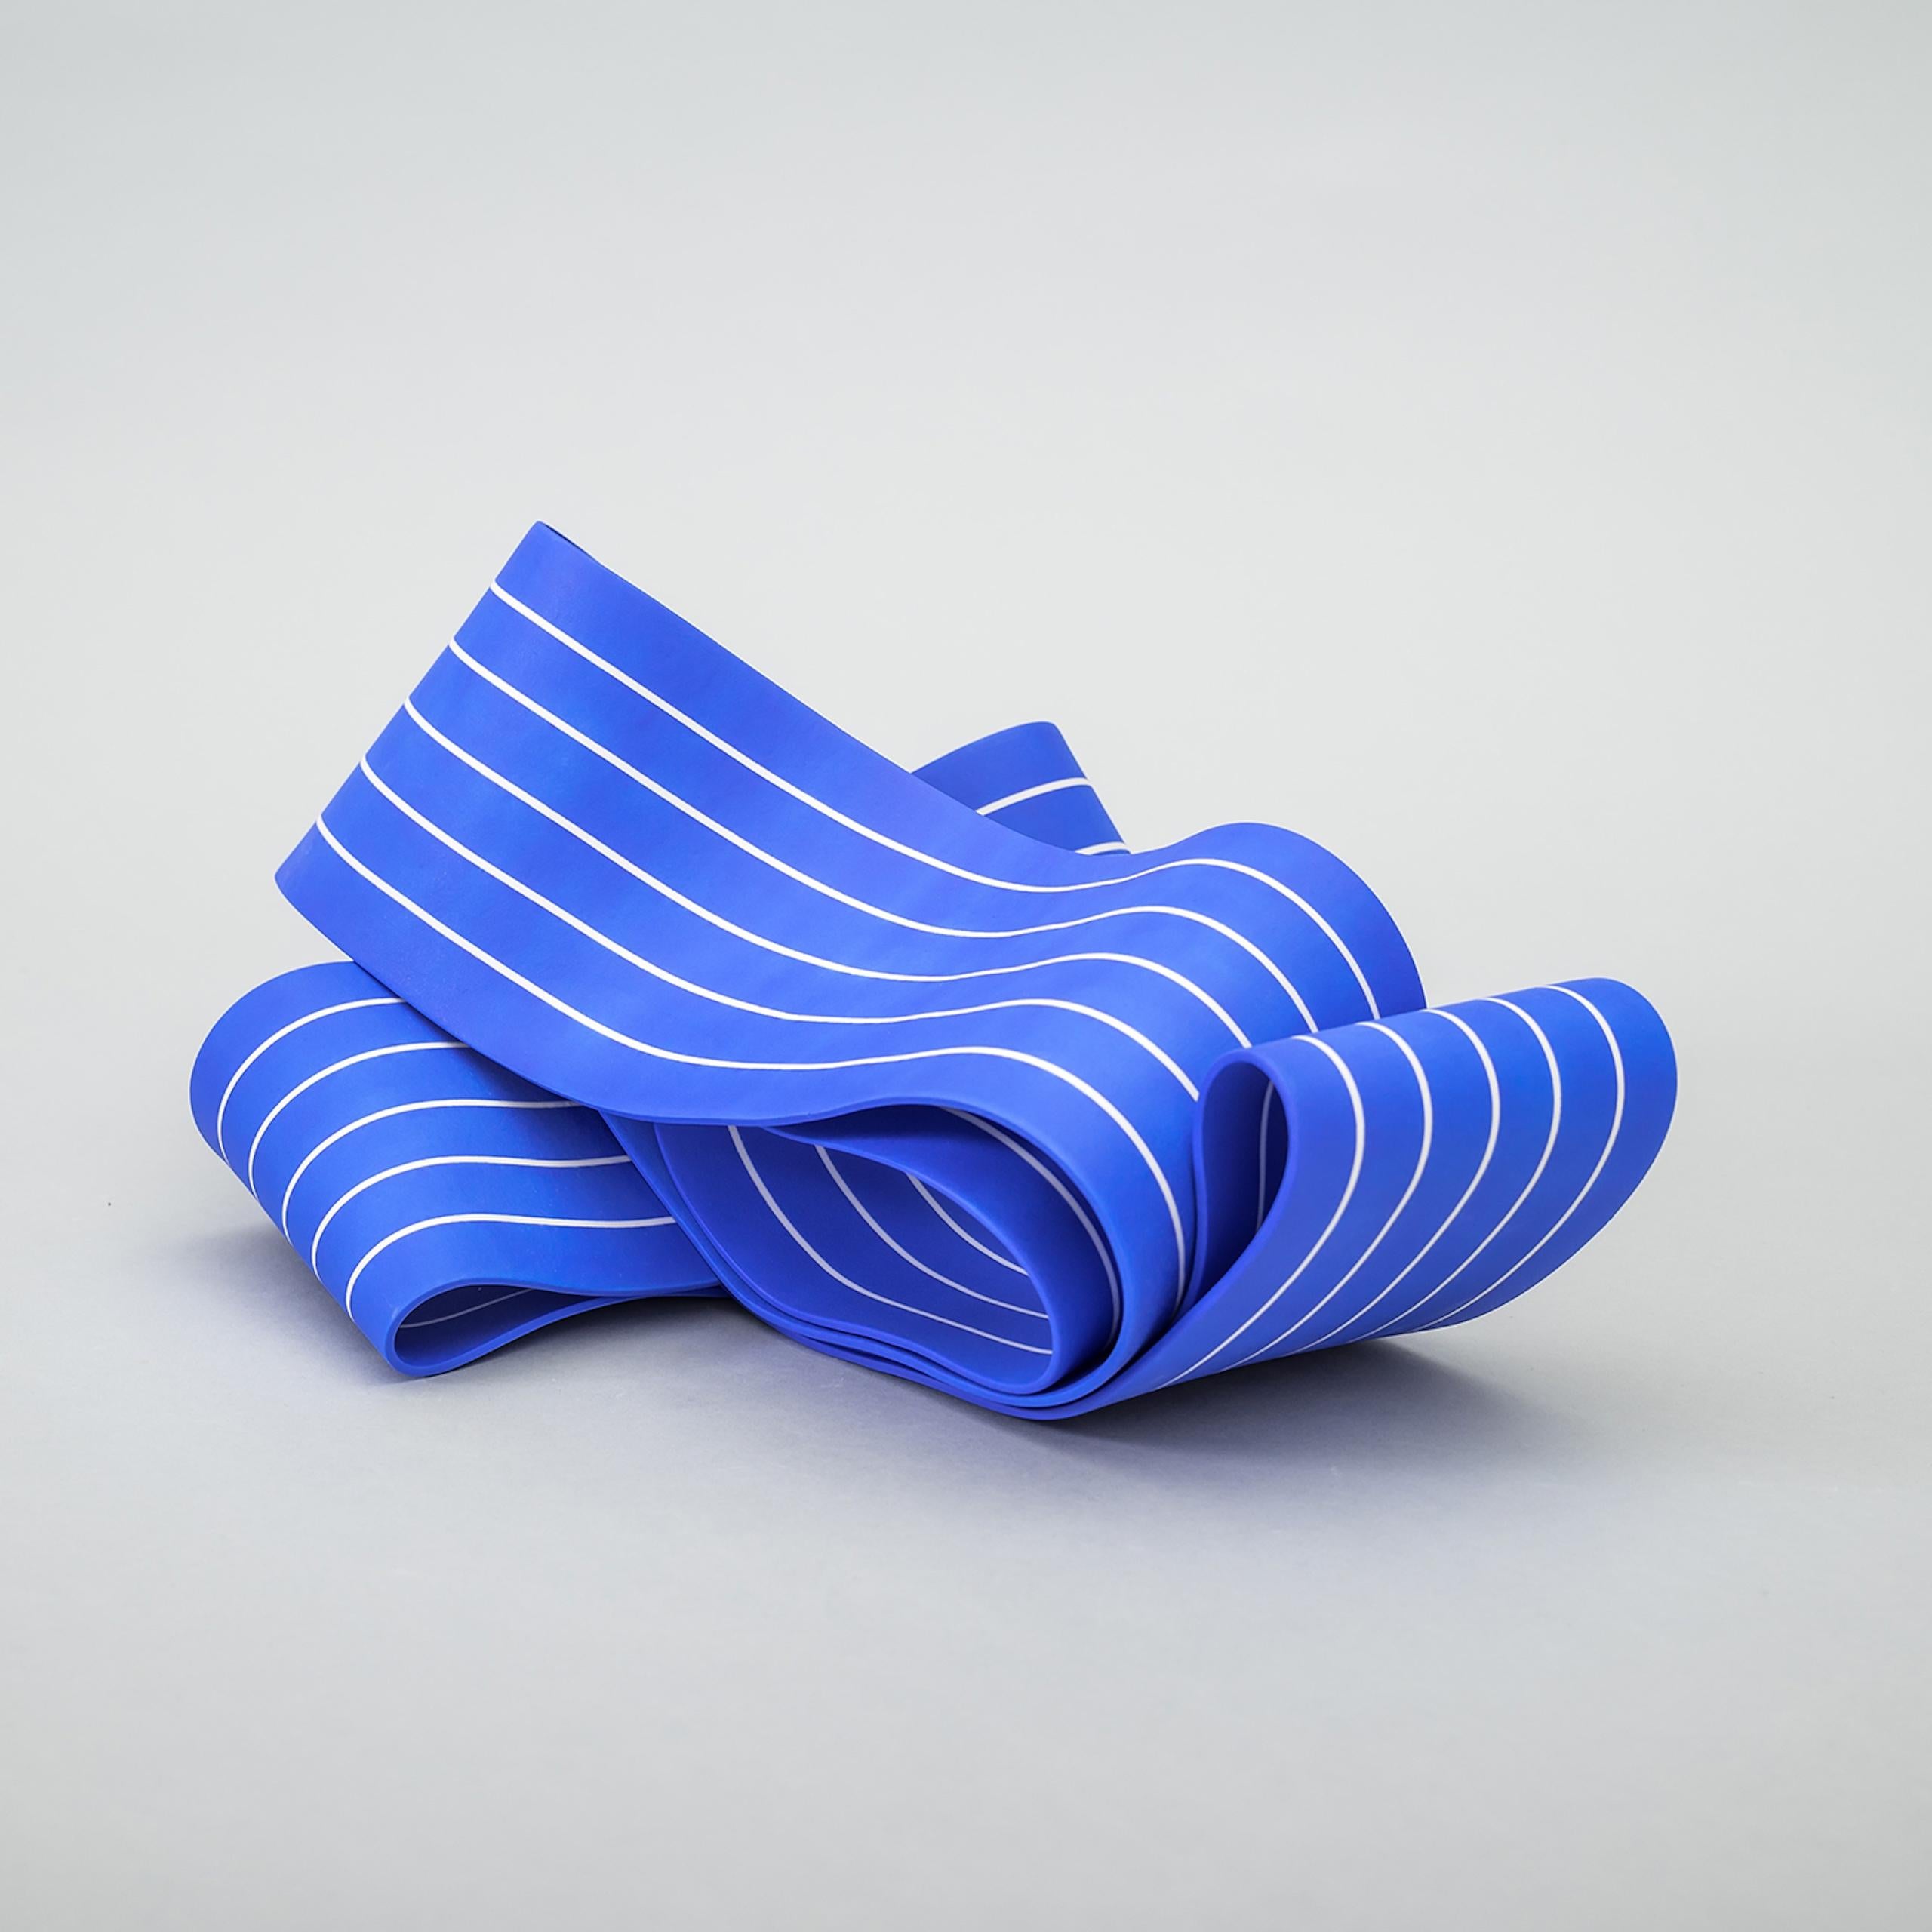 This sculpture is part of the sculptor’s most recent work, in which she uses paper porcelain (porcelain with 0.5% paper fibre added for greater flexibility) to create organic, dynamic and natural shapes. The artist tests the physical limits of the